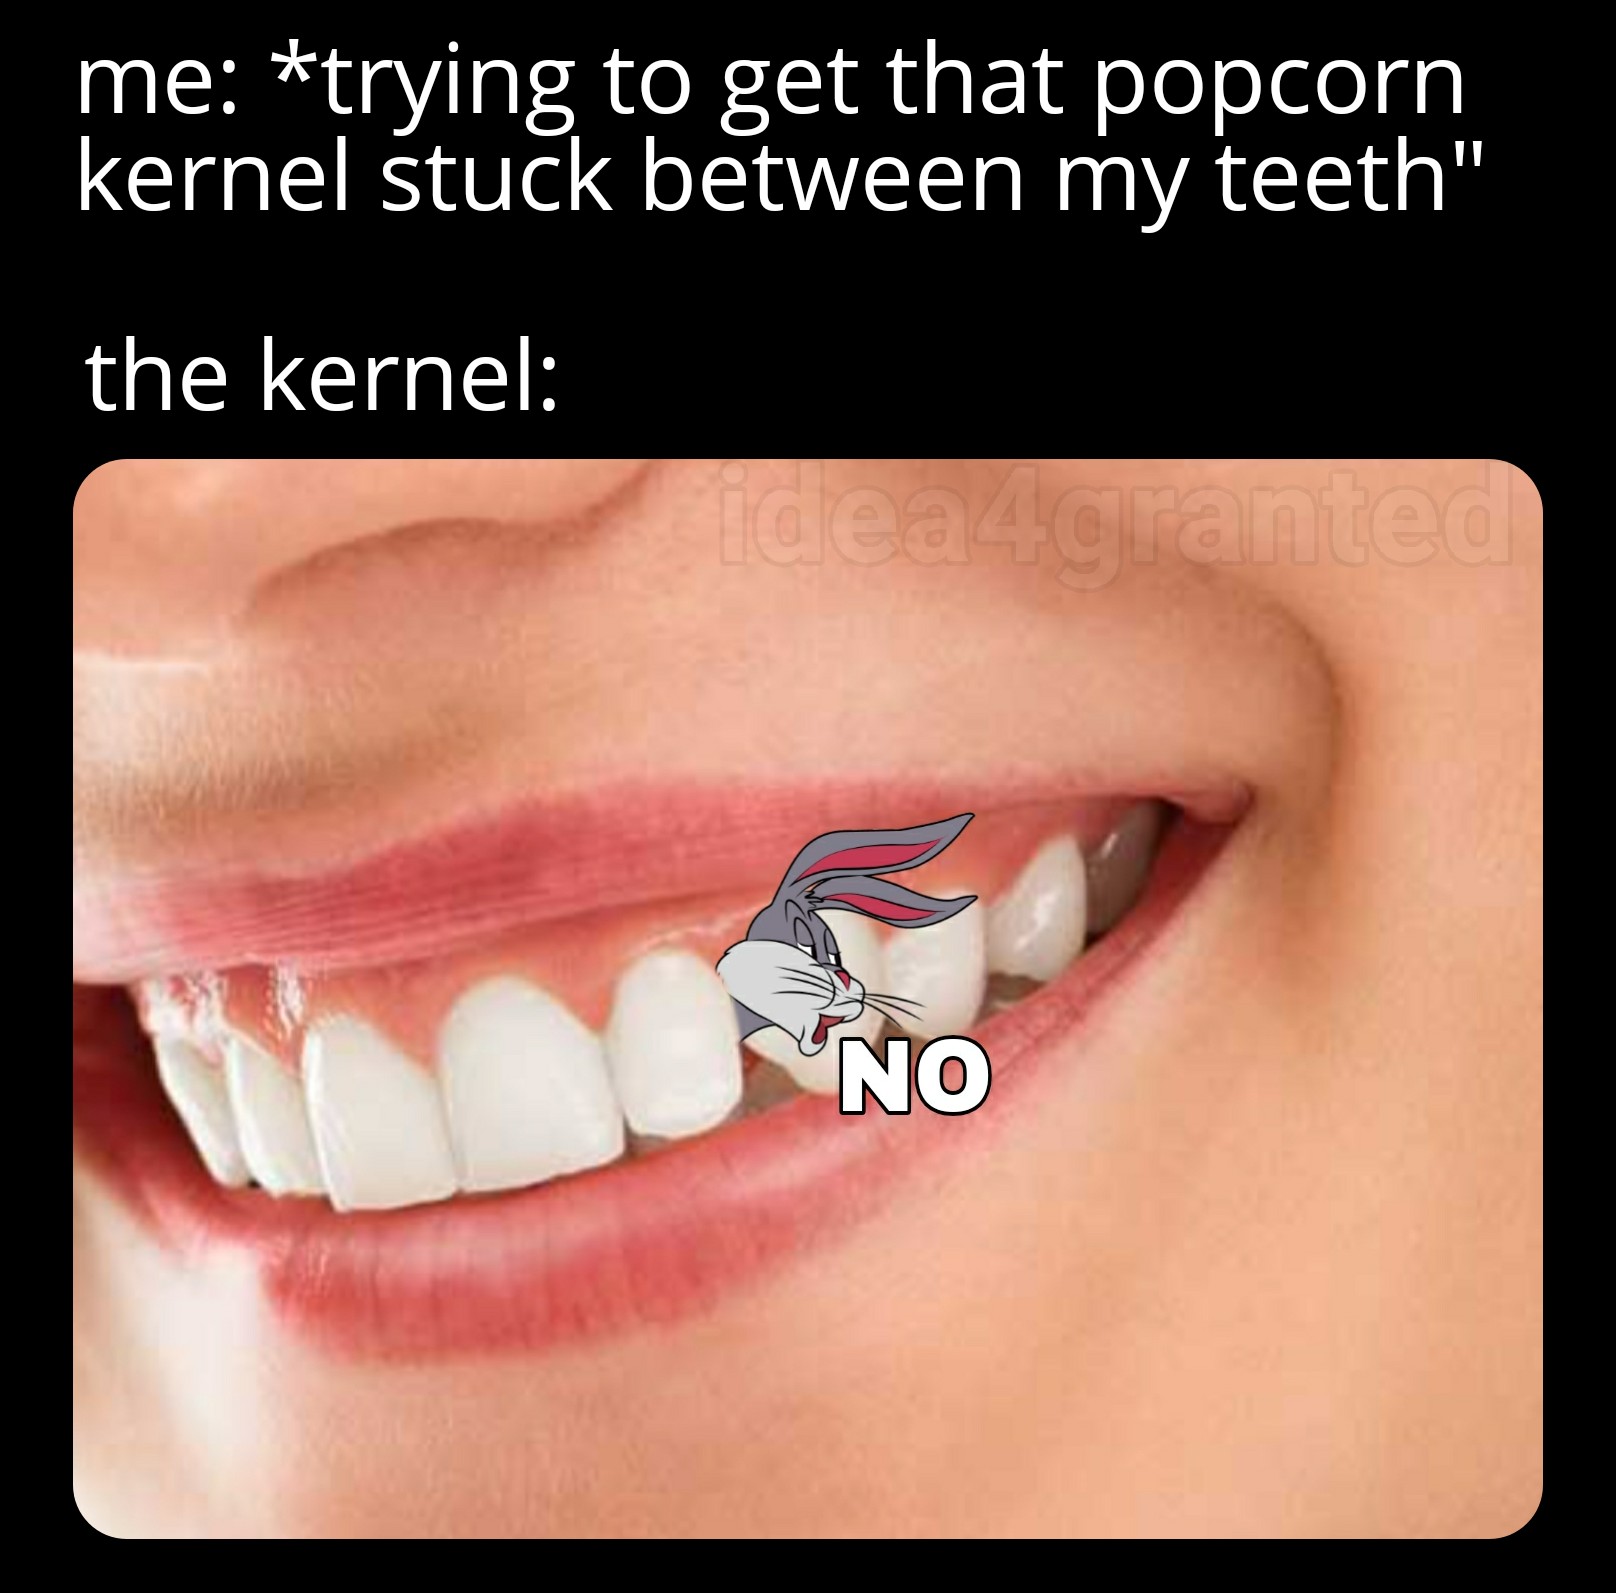 me trying to get that popcorn kernel stuck between my teeth" the kernel idea 4 granted No